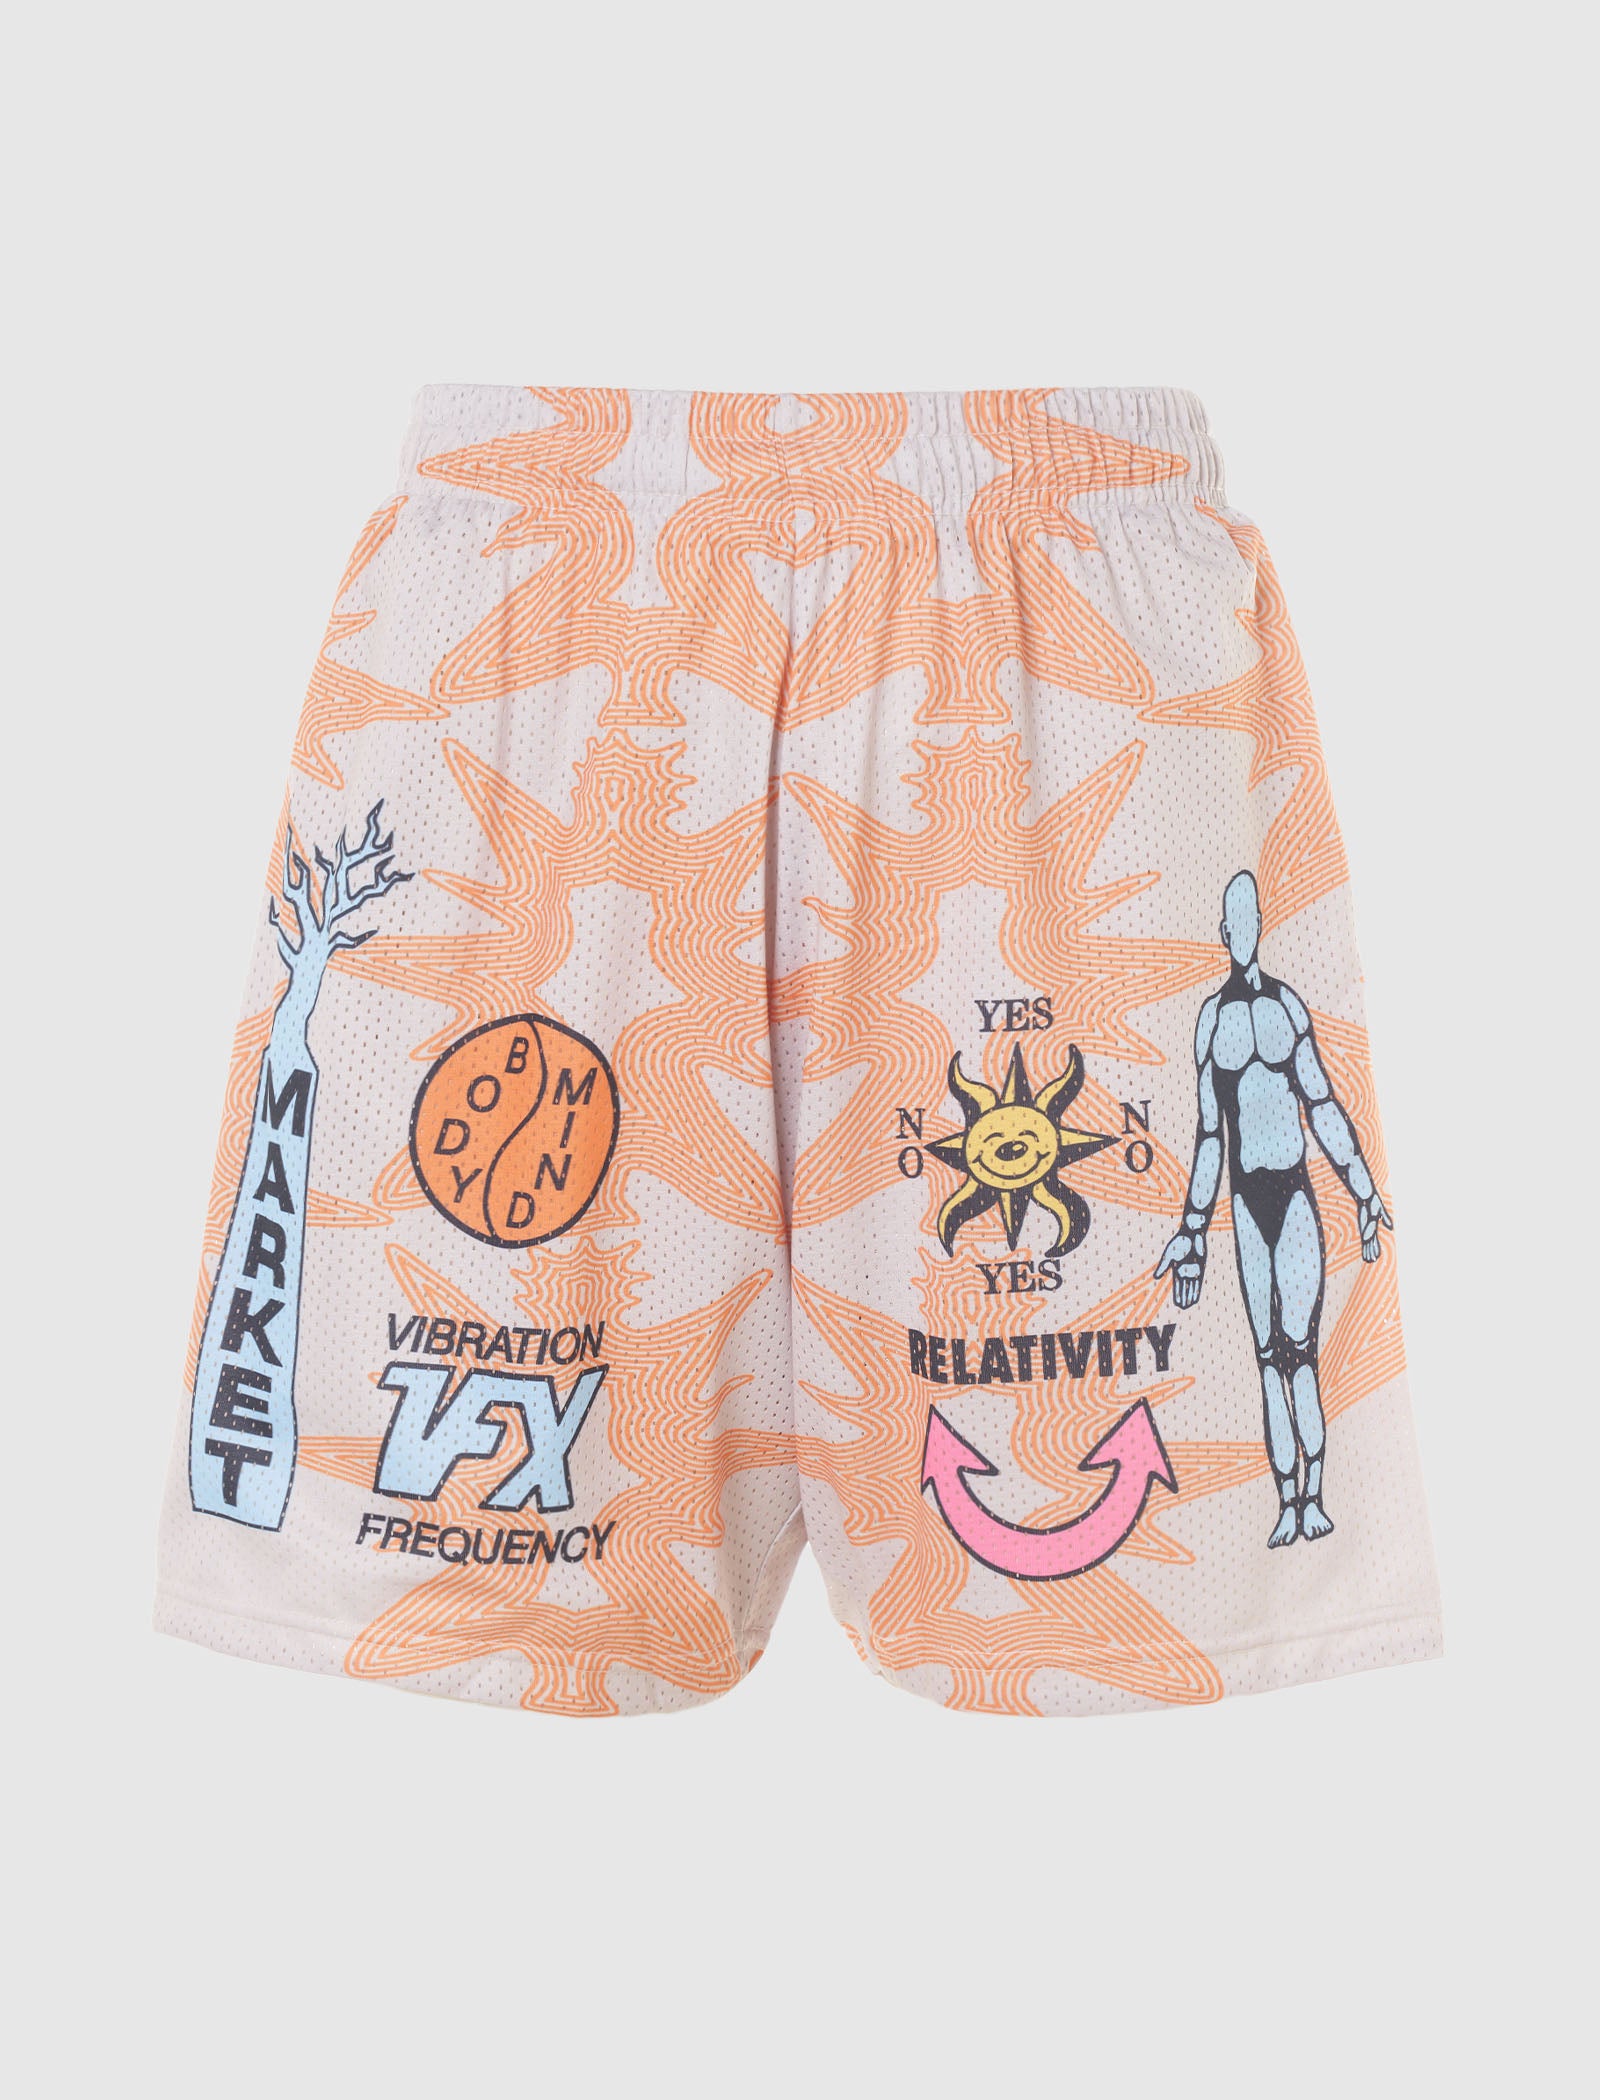 MA®KET SMILEY PAIR OF DICE SHORT